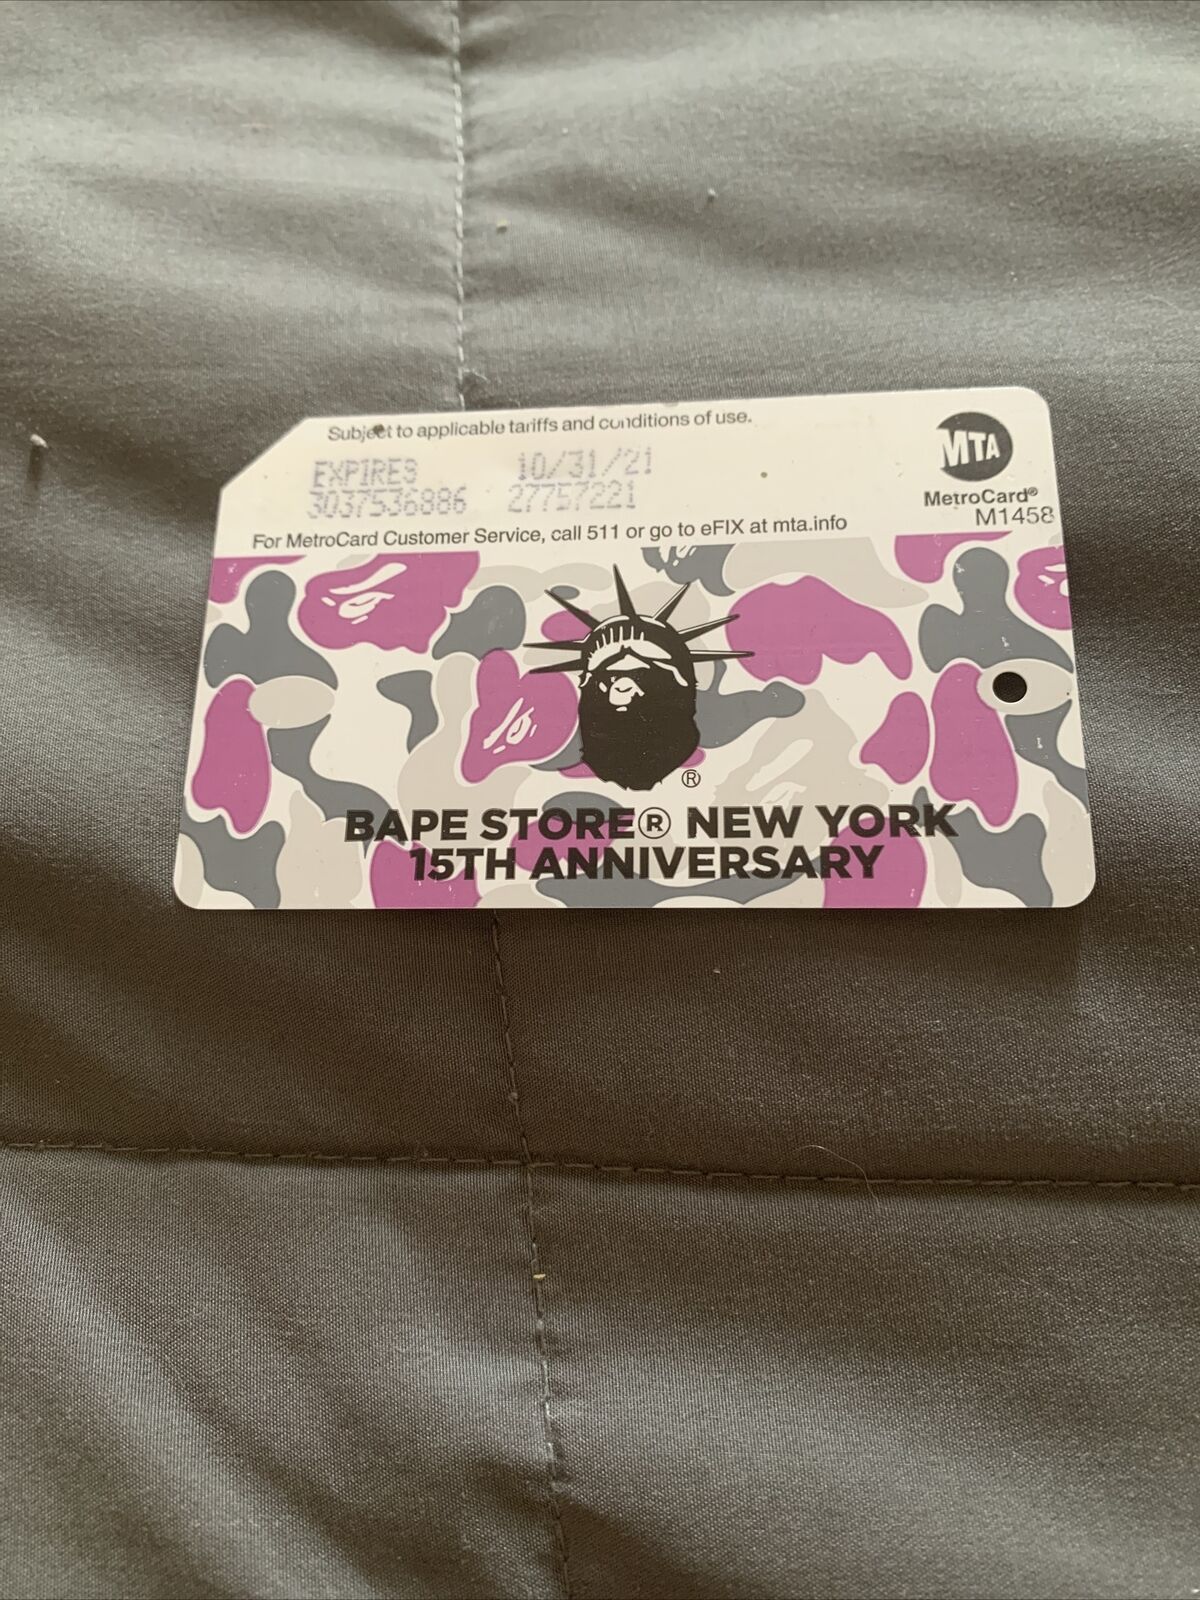 BAPE NYC MTA 15th ANNIVERSARY Metrocard Expired Collectible Item 